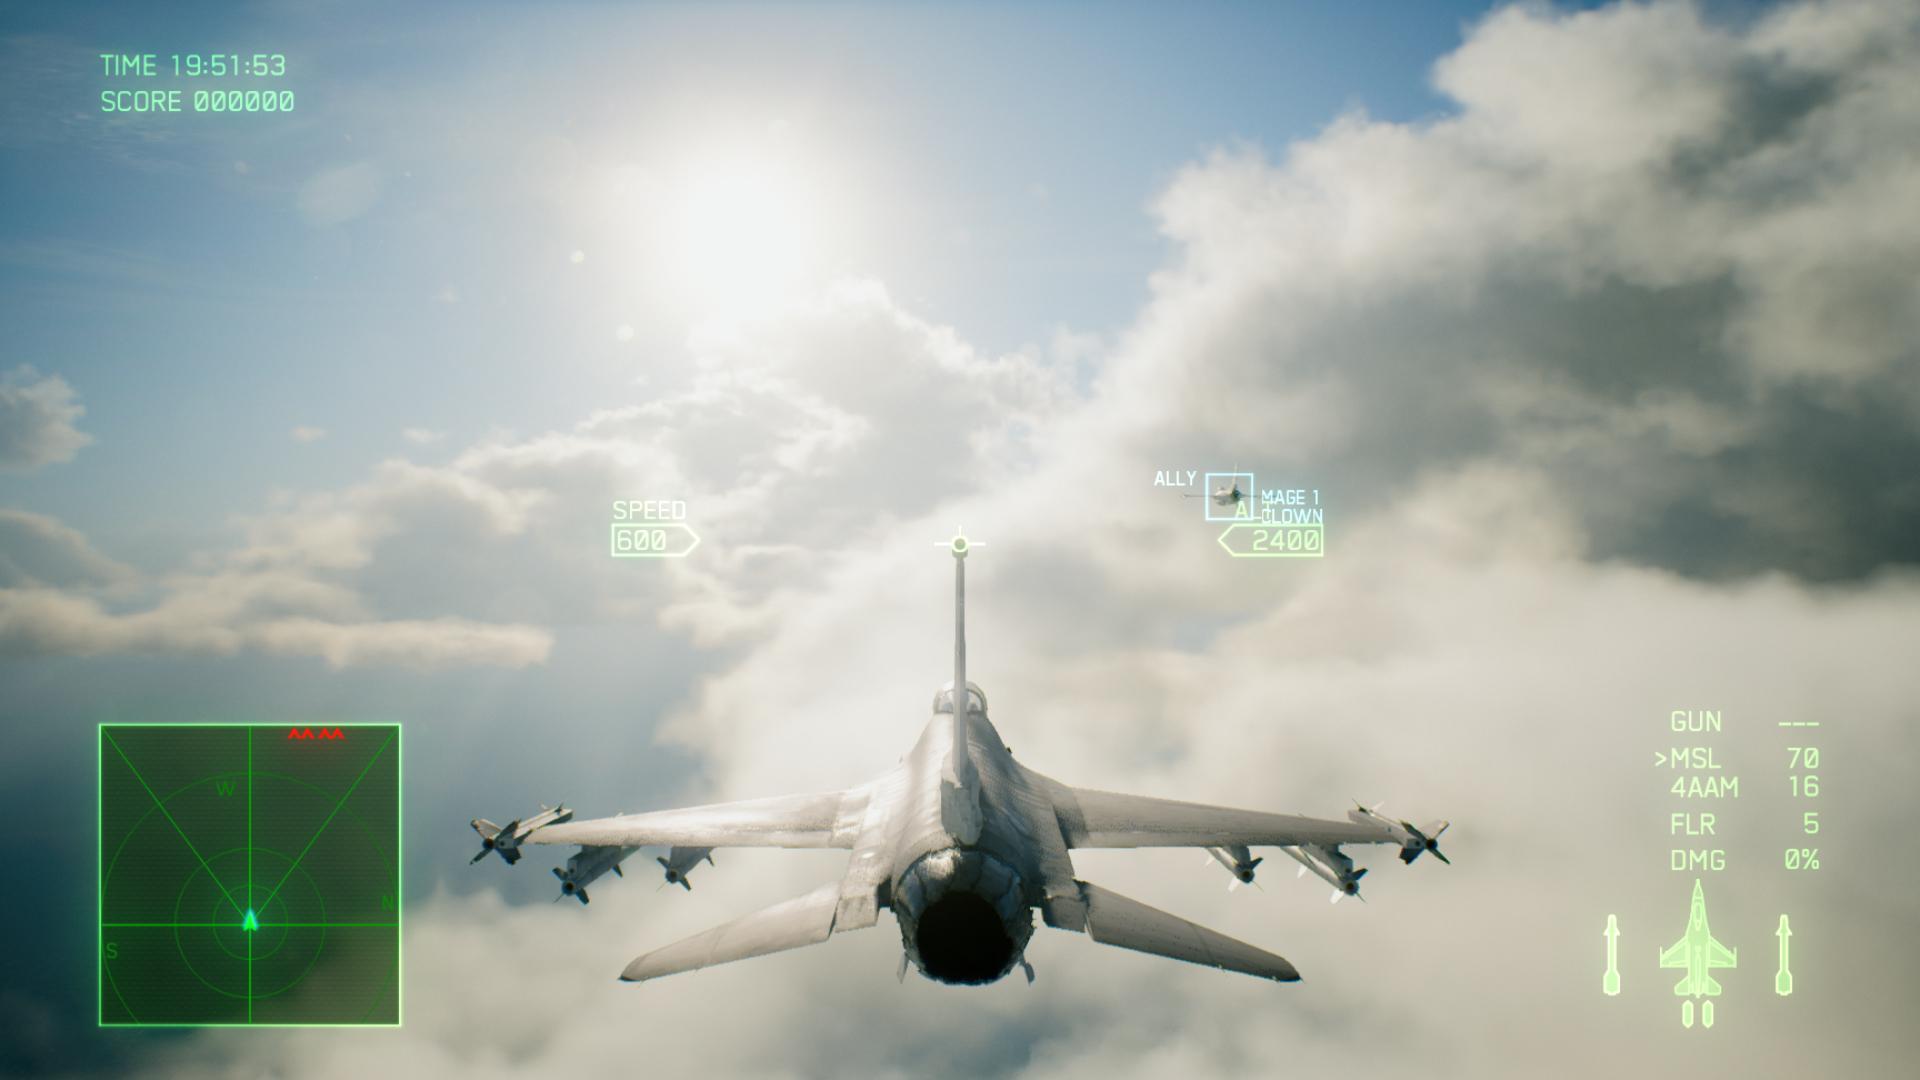 Screenshot №9 from game ACE COMBAT™ 7: SKIES UNKNOWN